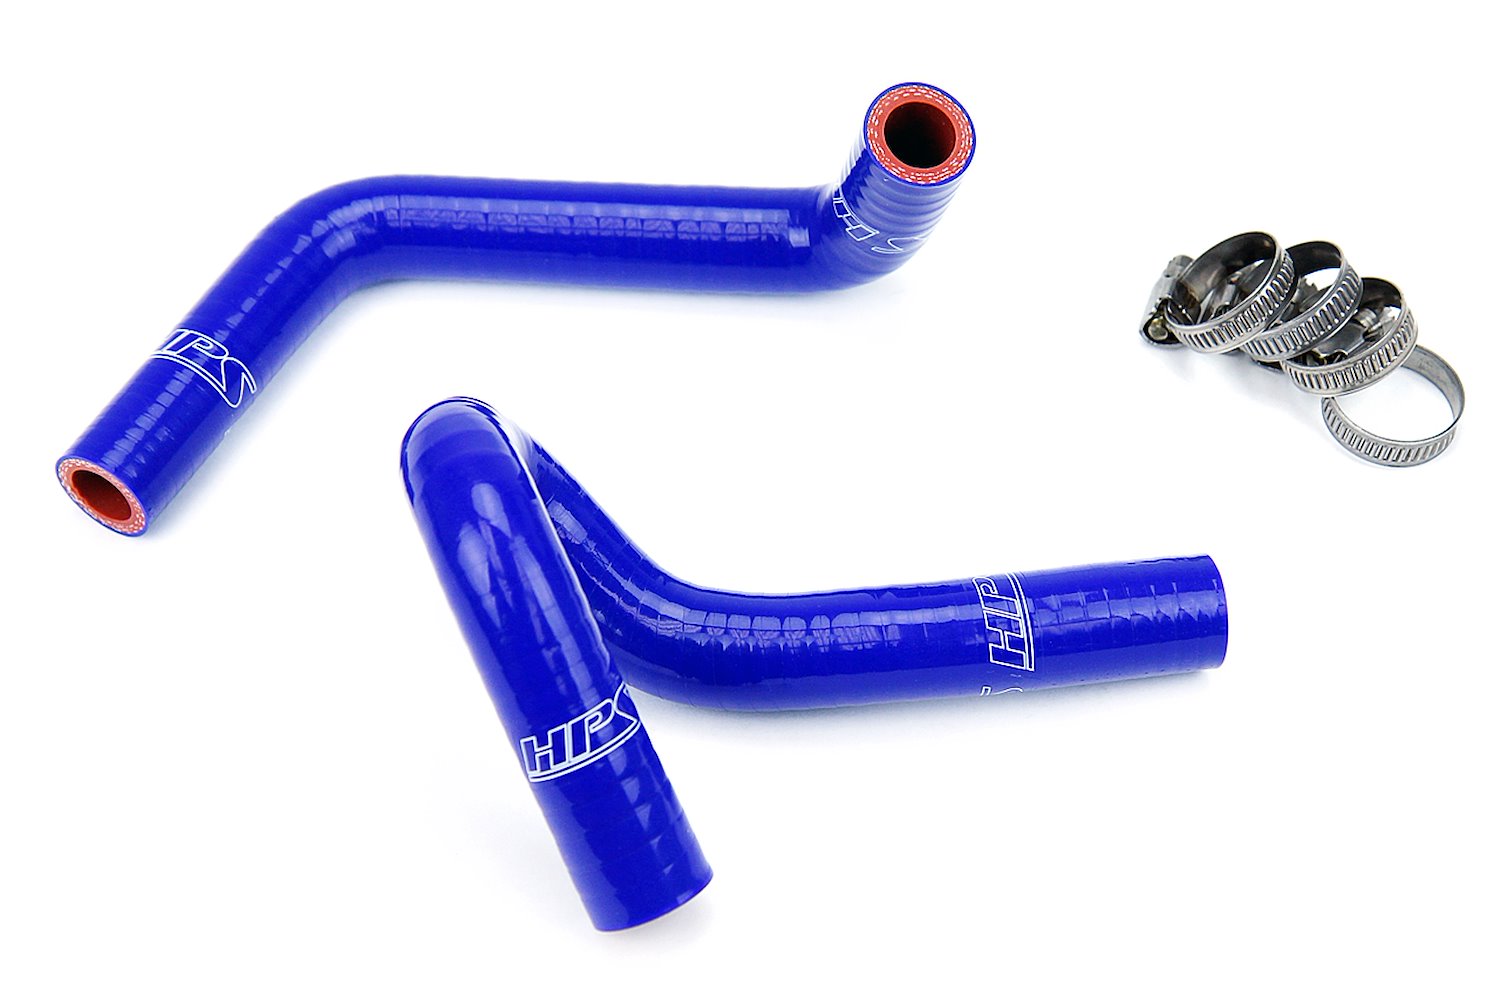 57-1310-BLUE Heater Hose Kit, High-Temp 3-Ply Reinforced Silicone, Replace OEM Rubber Heater Coolant Hoses